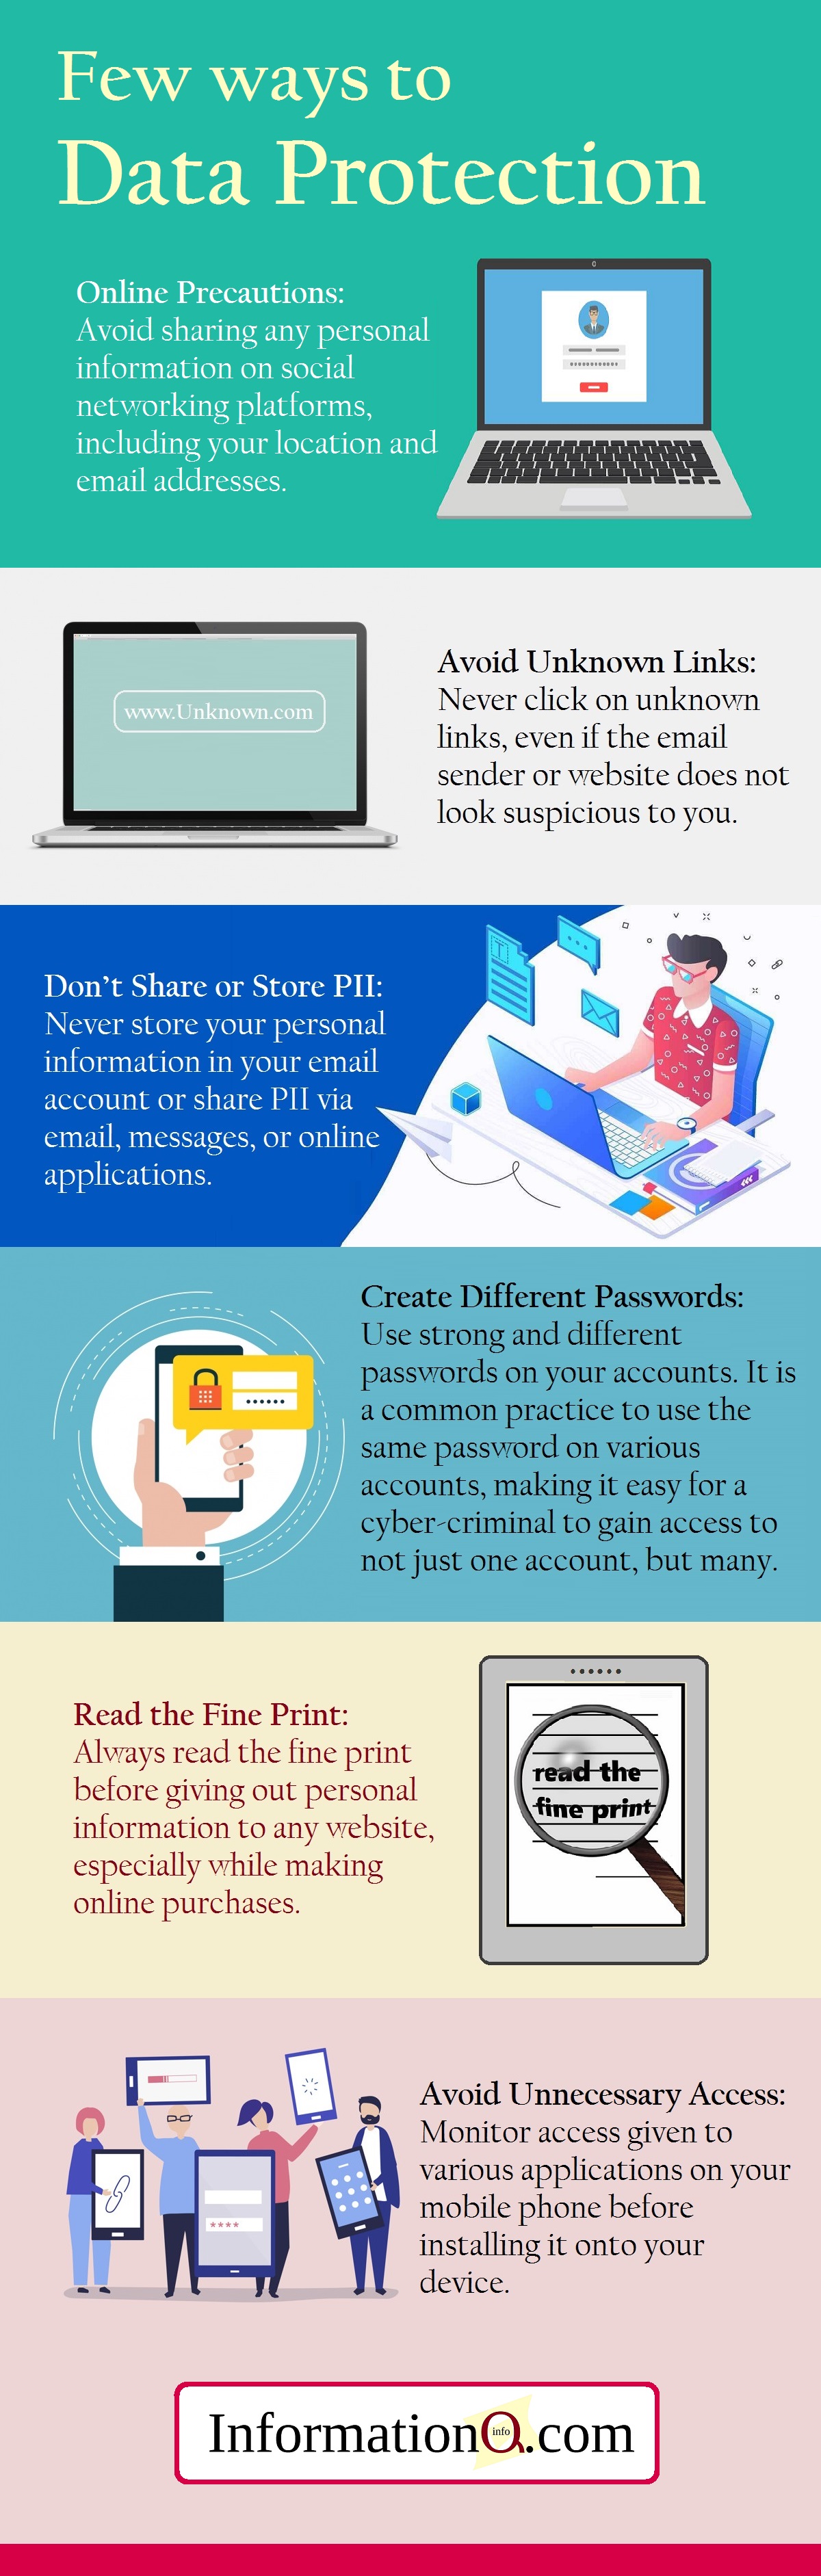 Few ways to Data Protection: 
1. Avoid Unknown Links 
2. Create Different Passwords 
3. Don’t Share or Store PII 
4. Read the Fine Print 
5. Avoid Unnecessary Access 
6. Online Precautions 